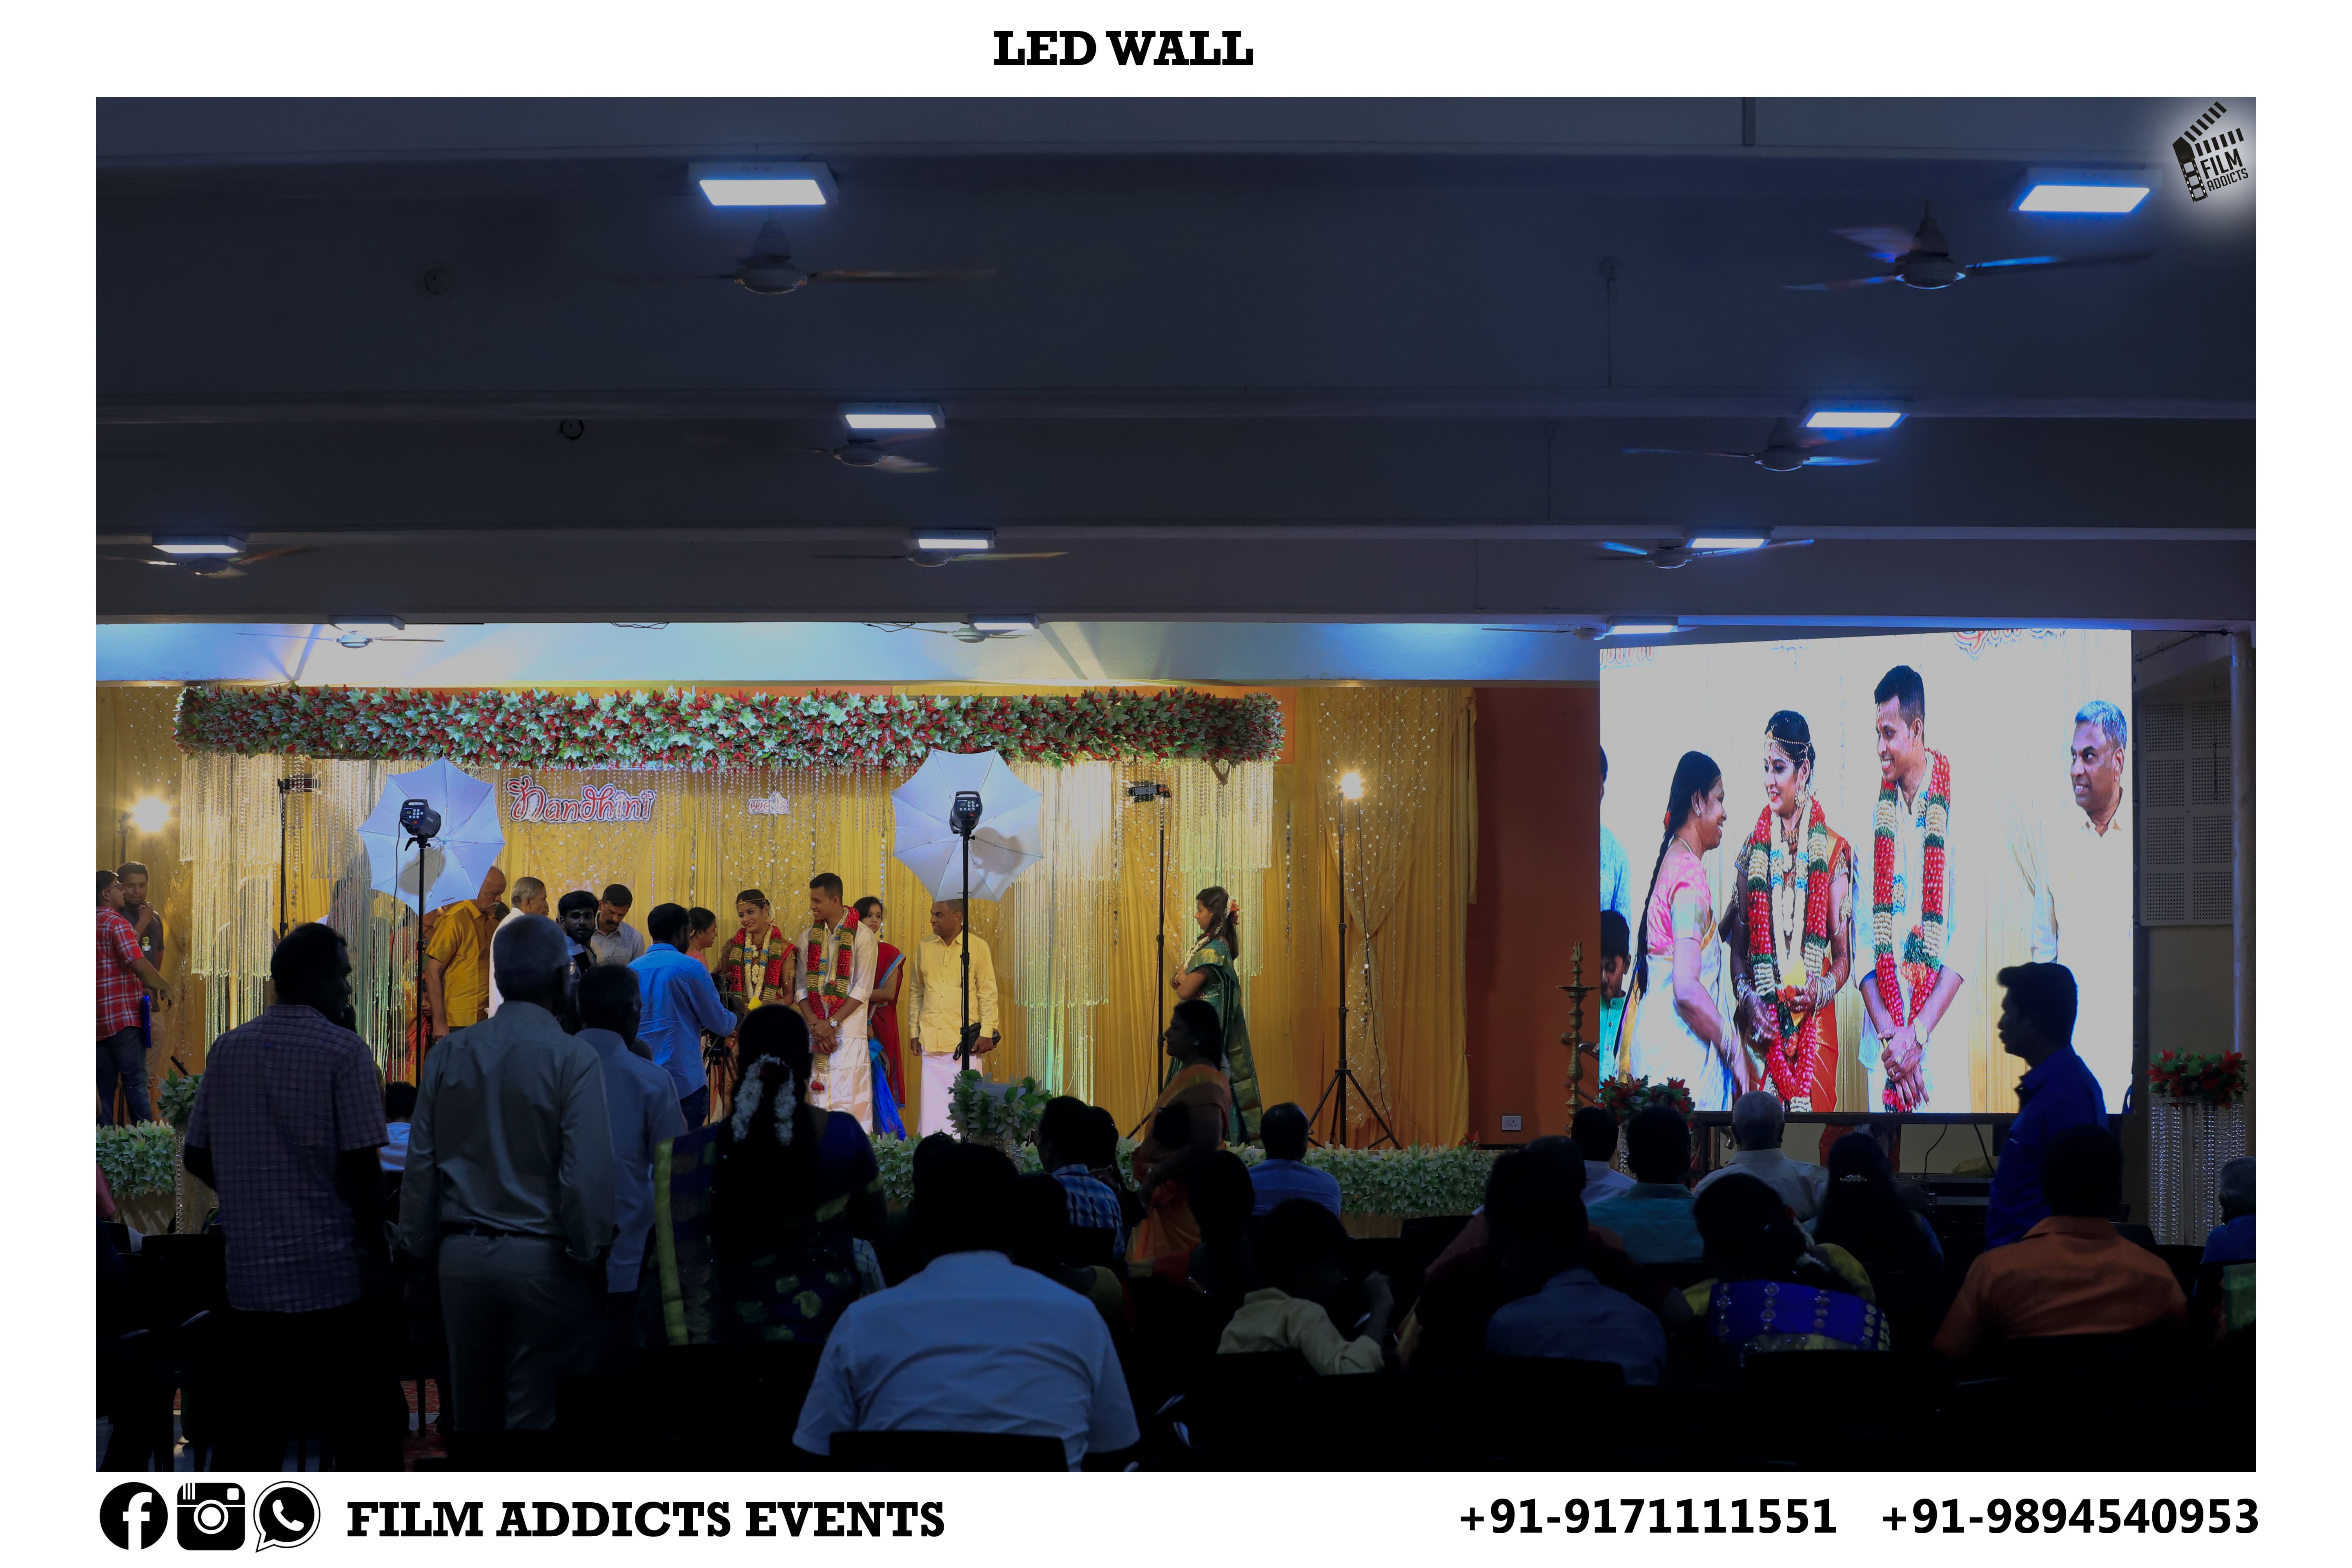 Best LED Video Wall Rentals in Dindigul, Best LED Wall Services In Dindigul ,Best LED Wall Rental Services In Dindigul, Best Budget LED Wall Rental  Services in Dindigul, Best Wedding LED Wall Rentals In Dindigul, Best clarity in led wall rentals in Dindigul, Best cost-effective display rentals in Dindigul, Best crisp, bright, high resolution led video services in Dindigul, Best led wall rental services in Dindigul, Best tailored lighting, vision and sound solutions led rentals in Dindigul, Best outstanding new LED panels rental Service in Dindigul, Best Indoor and Outdoor LED panels rental Service in Dindigul, Best high resolution LED display rental Service in Dindigul, Best Wedding LED wall rentals in Dindigul, Best Grand wedding LED wall rentals in Dindigul, Best LED wall rental Service in Dindigul, Best LED Video Services in Dindigul, Best Grand Wedding LED wall Renatls in Dindigul, Best LED wall Rentals for Grand Occasions in Dindigul, Best Wedding LED Video Services in Dindigul, Best Wedding LED video wall Rental Services in Dindigul, Best LED Video Wall Rentals for Grand Occassions in Dindigul, Best LED Video Wall Rentals for events in Dindigul, Best LED video Services for live events in Dindigul, Best video wall rentals for Live events in Dindigul, Best LED Video Wall Rentals for Live events in Dindigul, Best LED Video Wall On Hire in Dindigul, Best LED Video Wall Services in Dindigul, Best LED Video Wall Service Systems in Dindigul, Best LED Wall Washer Light Services in Dindigul, Best LED Wall Light Services in Dindigul, Best LED Wall Mount Bracket Services in Dindigul.